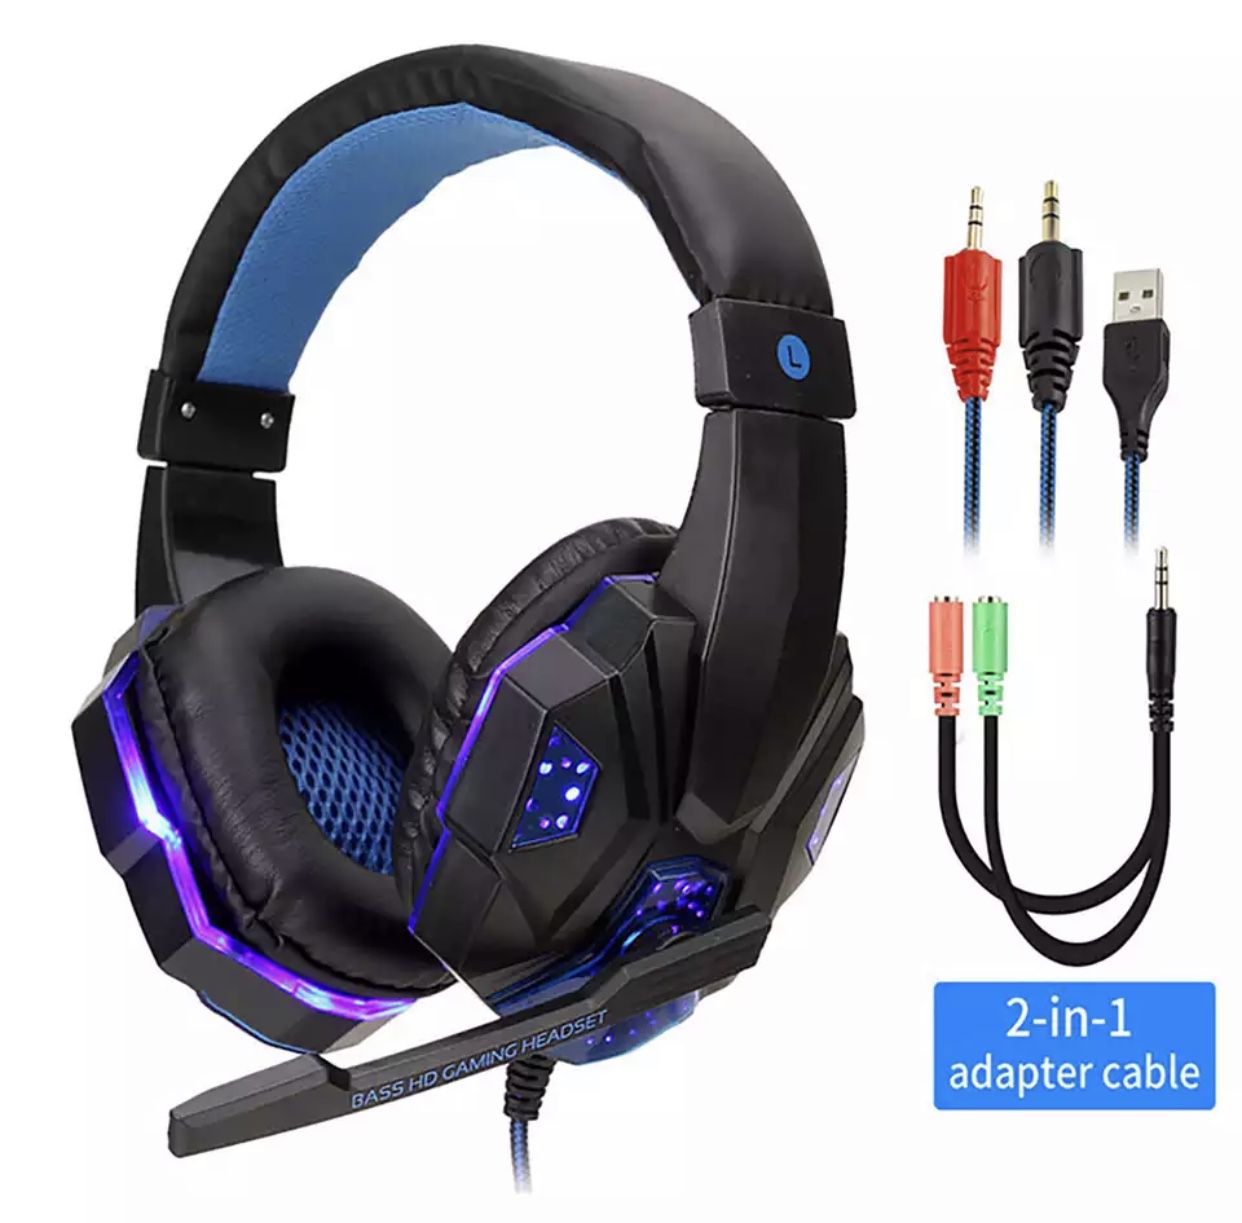 Gaming headset for PS4, Xbox one, pc! SALE!!